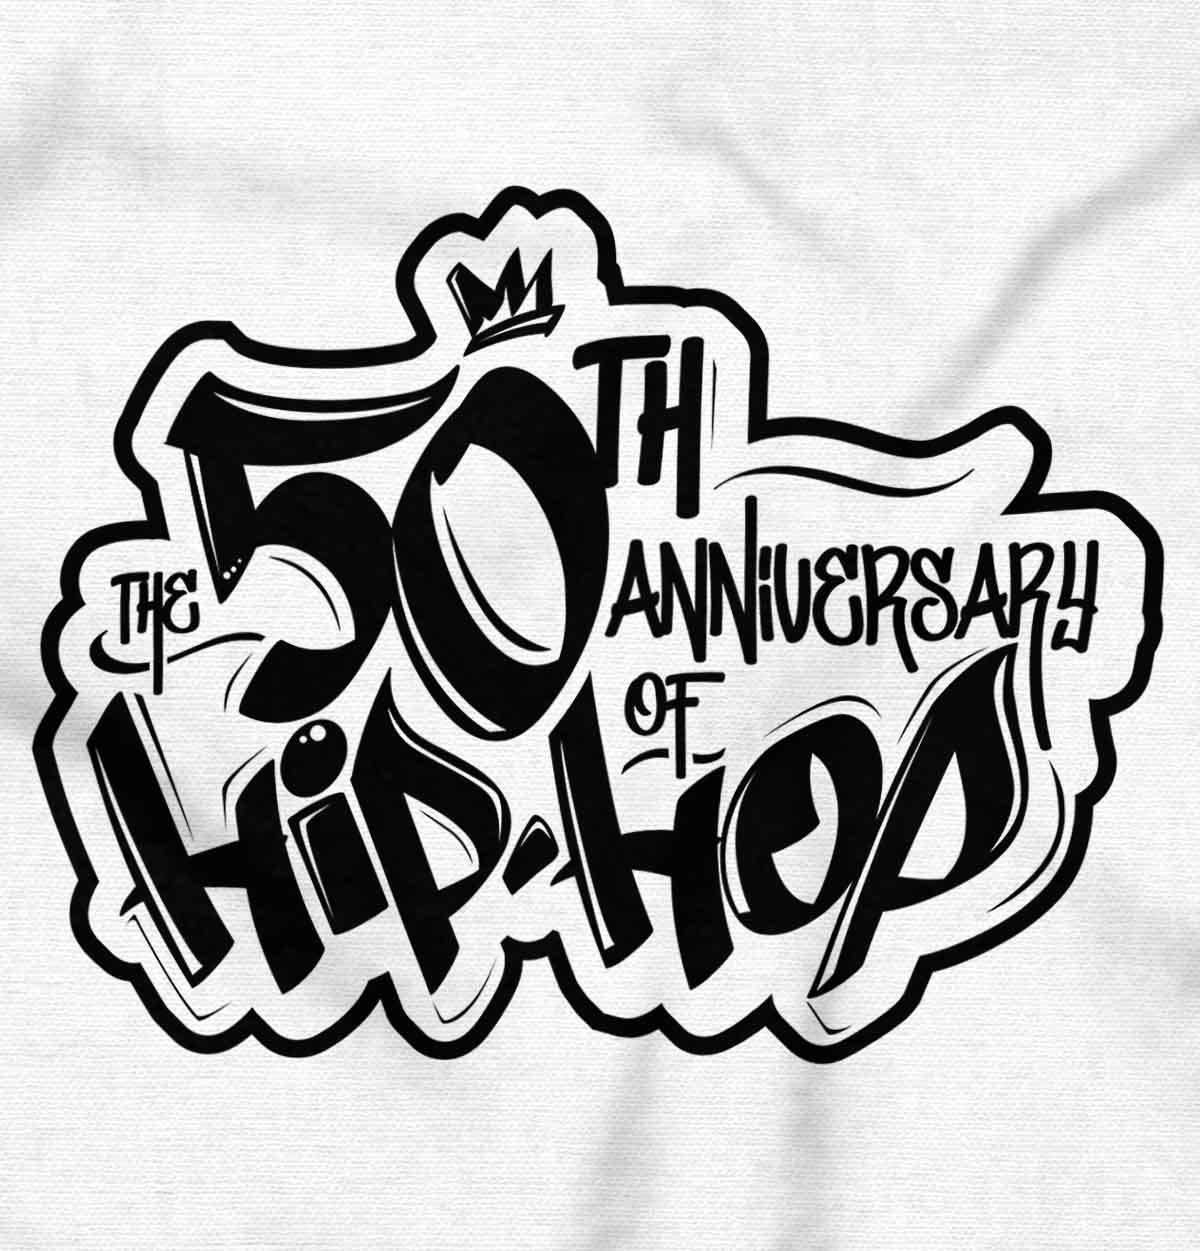 This image celebrates the 50th anniversary of hip-hop and pays tribute to its pioneers, showcasing the culture and power of rap music that has been a part of our lives since 1973 and will continue to thrive.